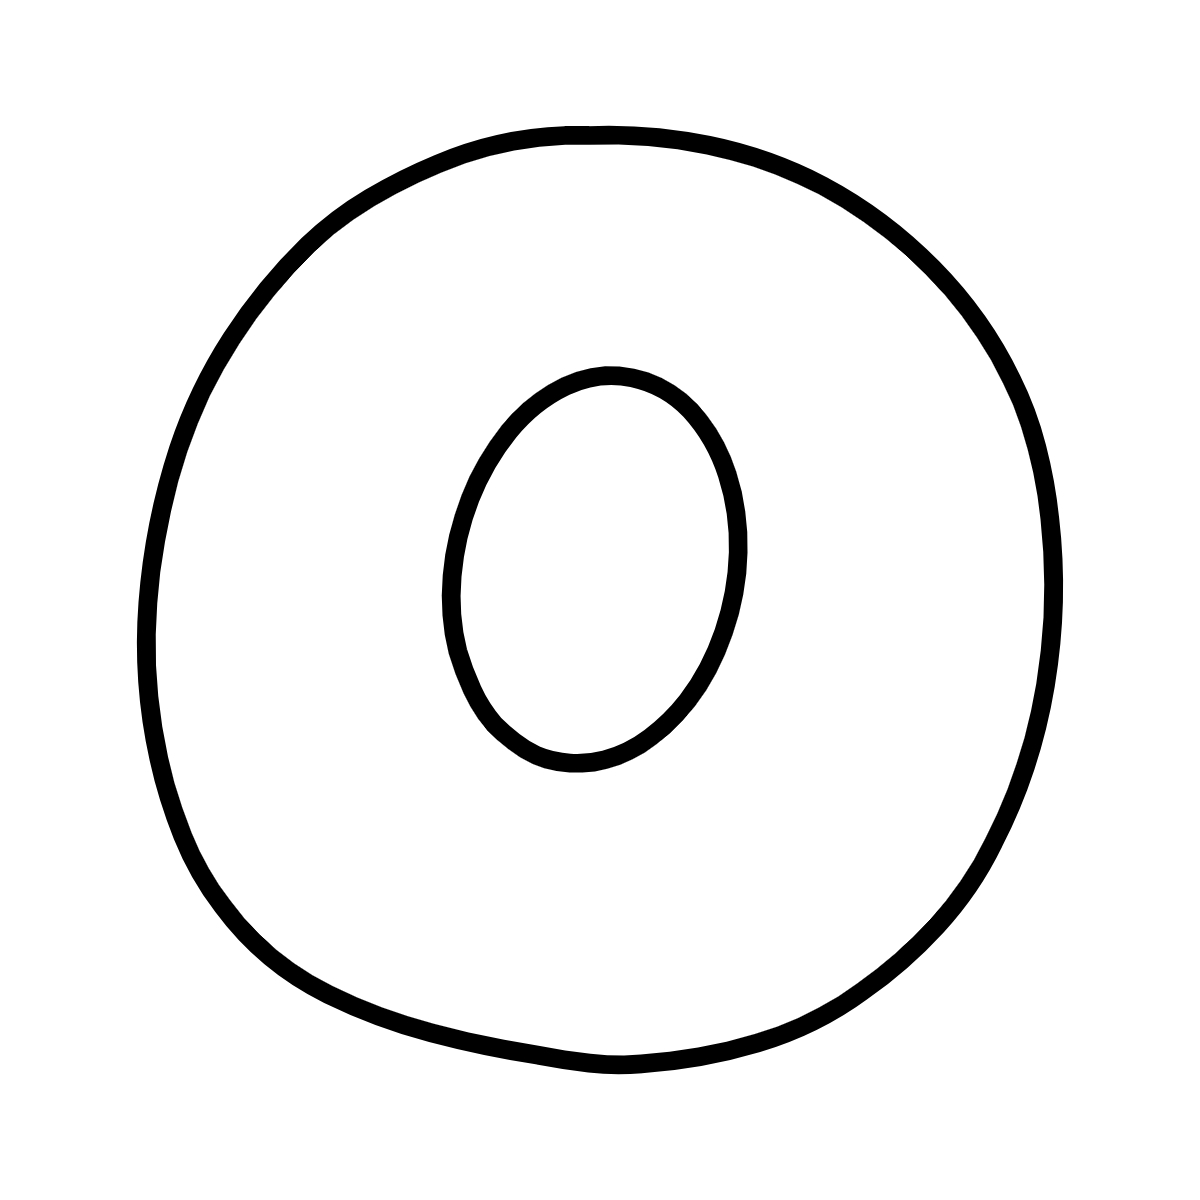 the letter o in bubble letters